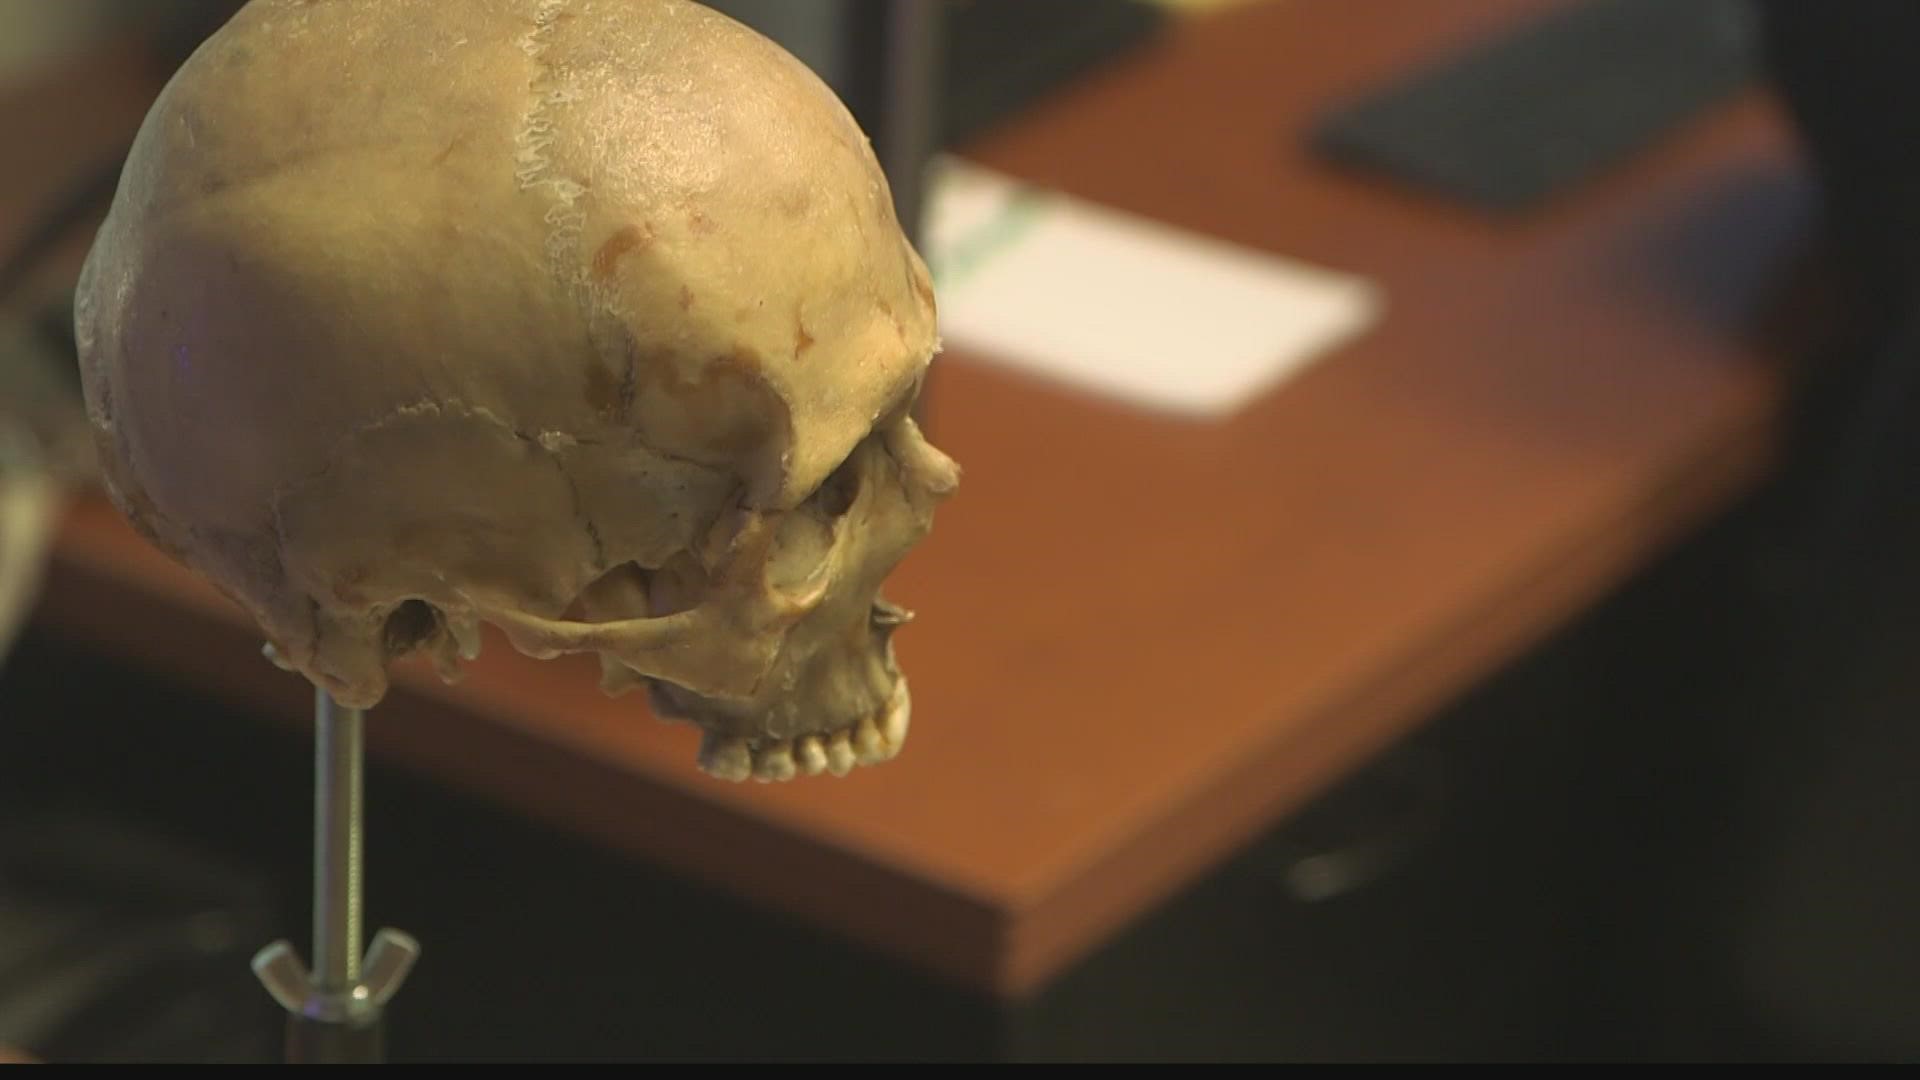 To find a murderer, you first have to identify the victim. But what if the body is just skeletal remains?  That is where the work of forensic imaging comes in.